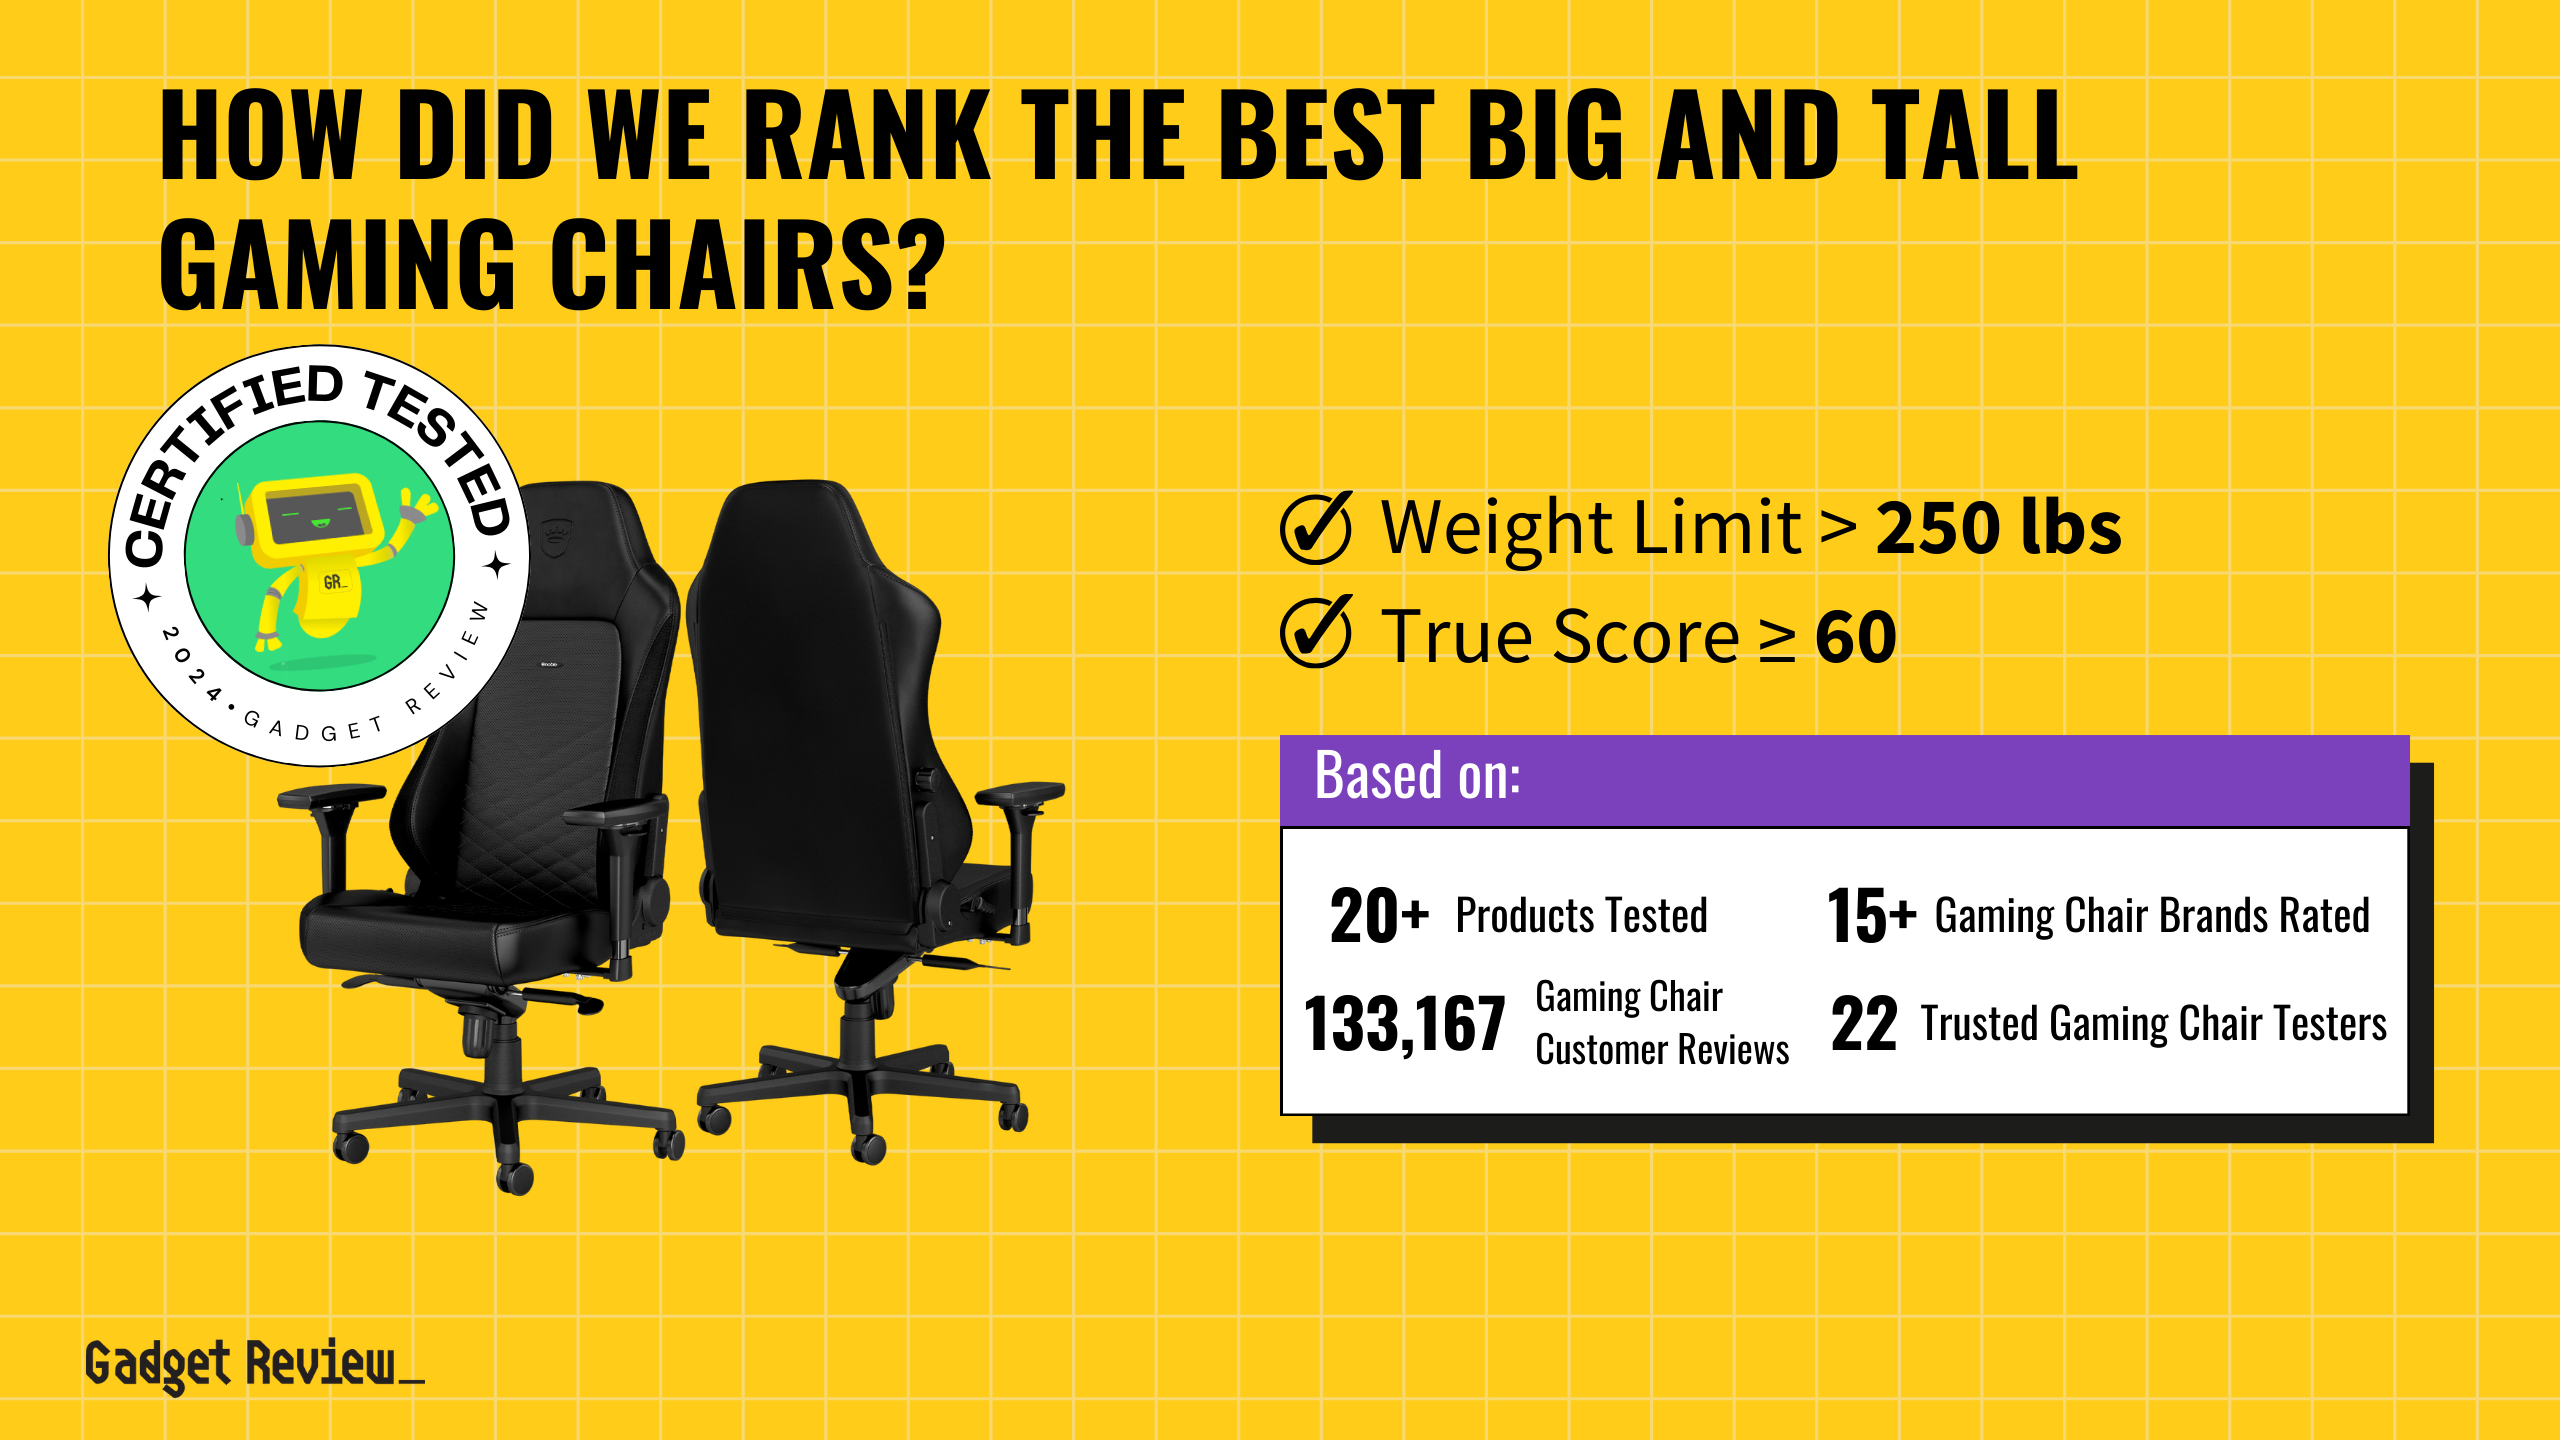 What are the Top 4 Big and Tall Gaming Chairs?